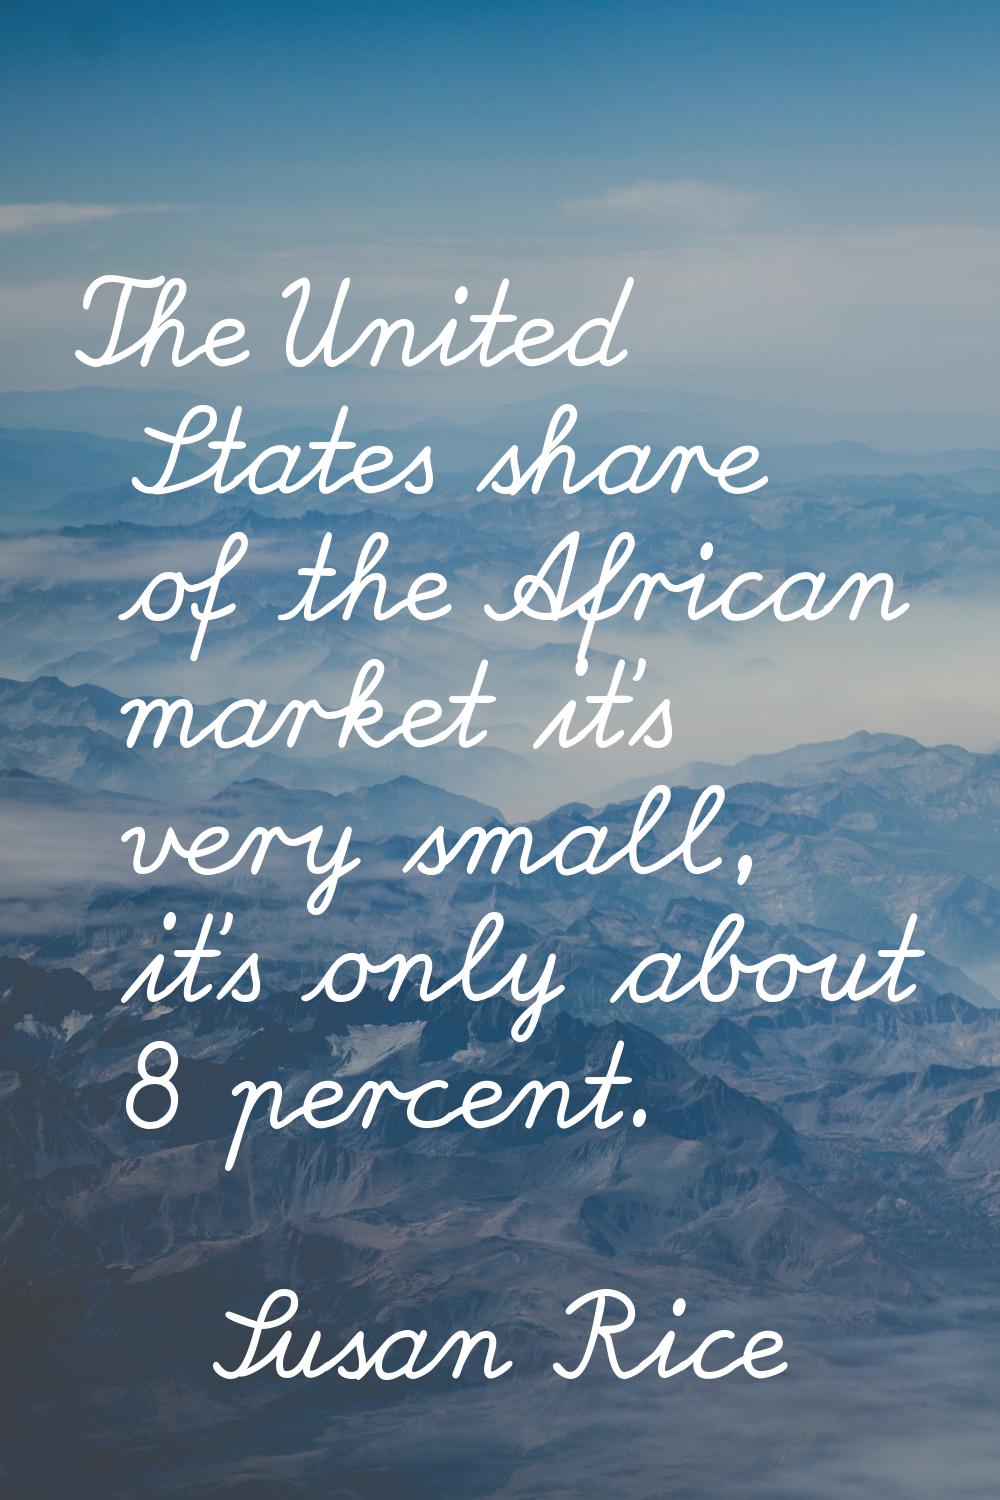 The United States share of the African market it's very small, it's only about 8 percent.